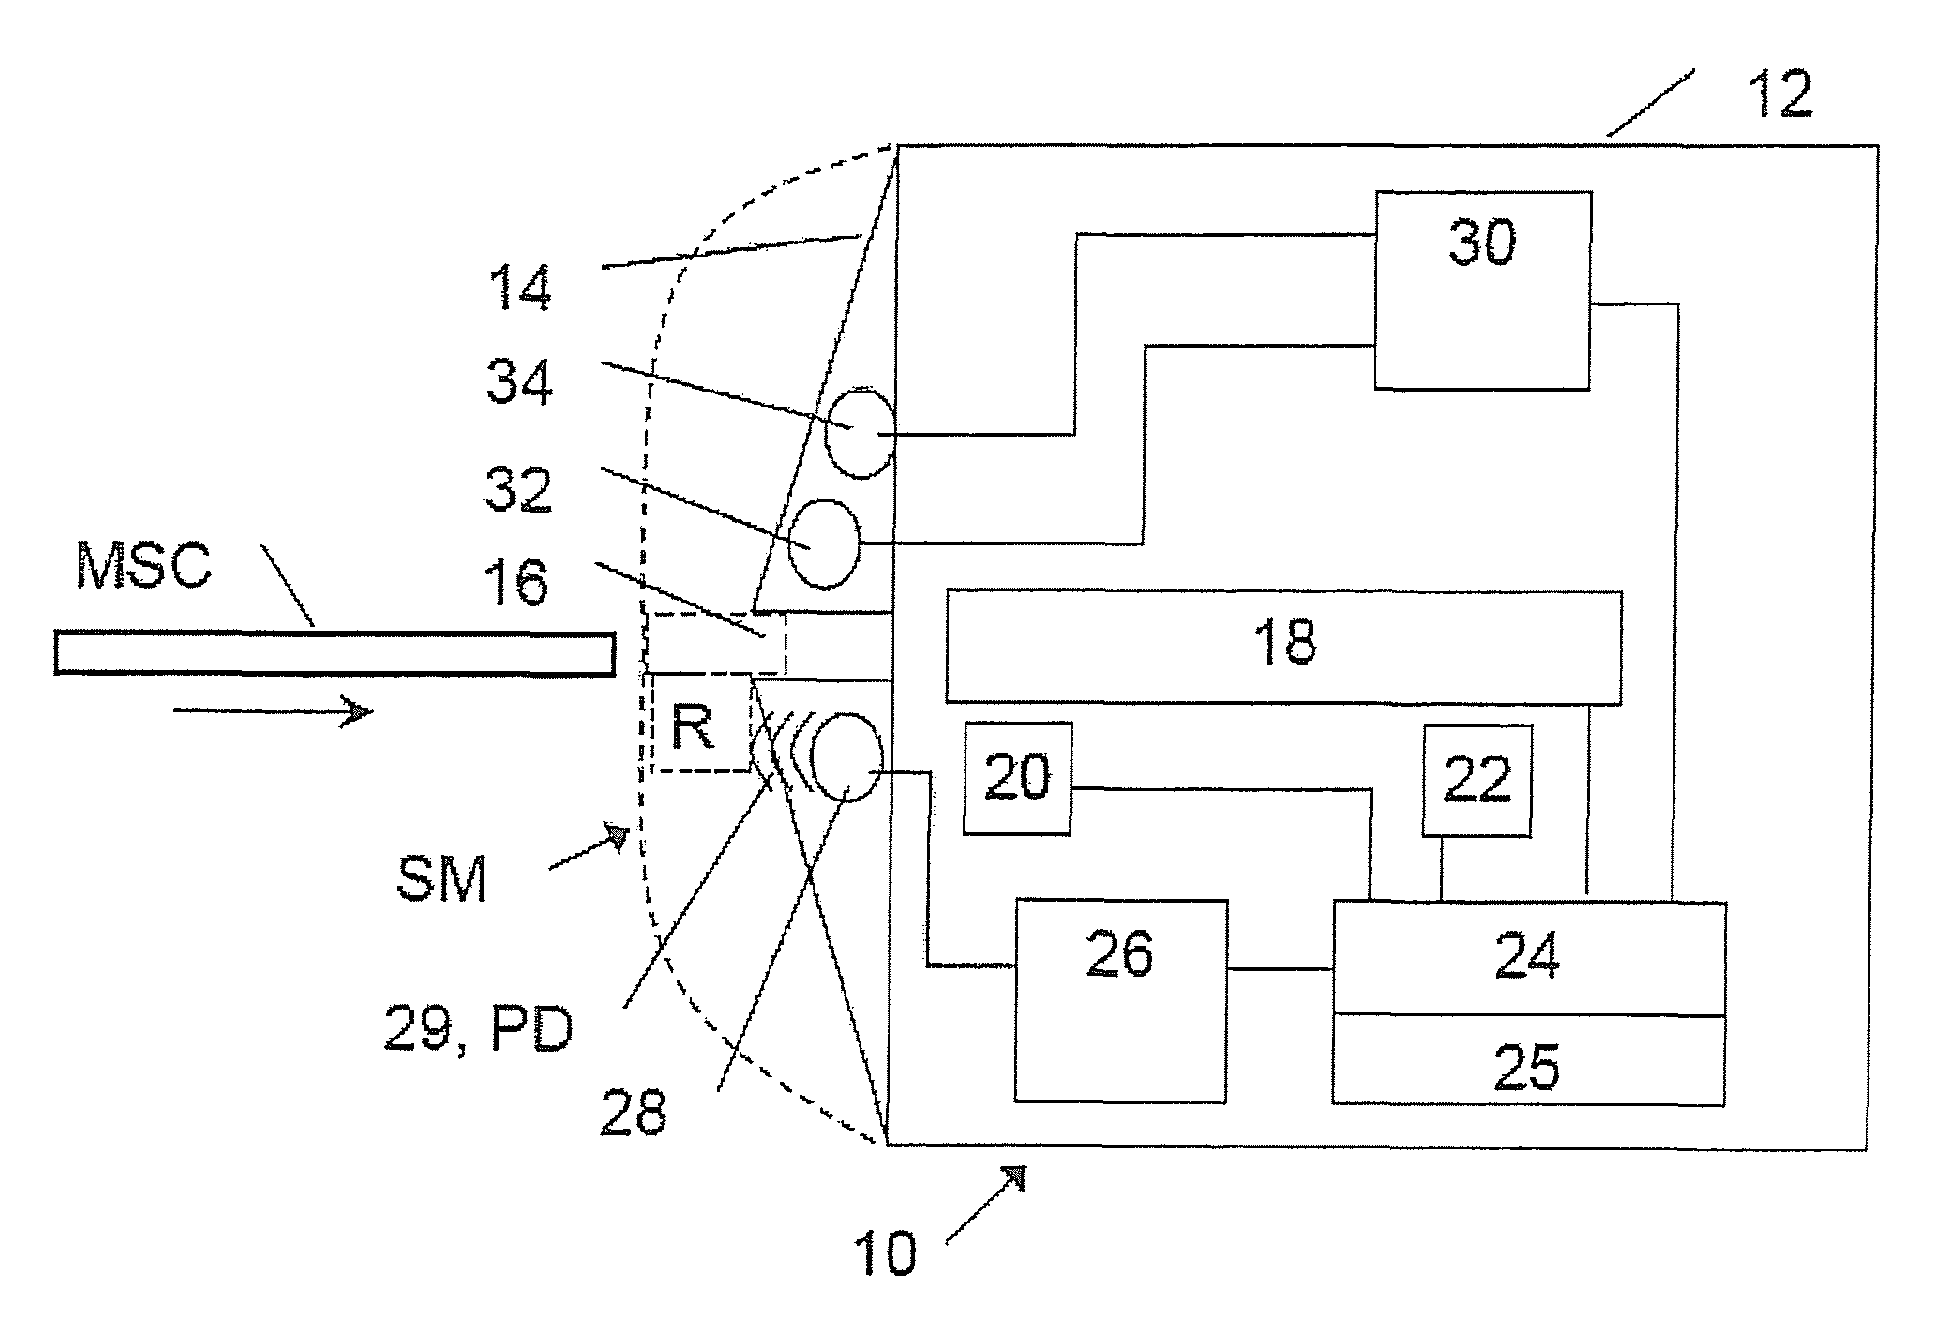 Protective device and method for preventing skimming on a card reader